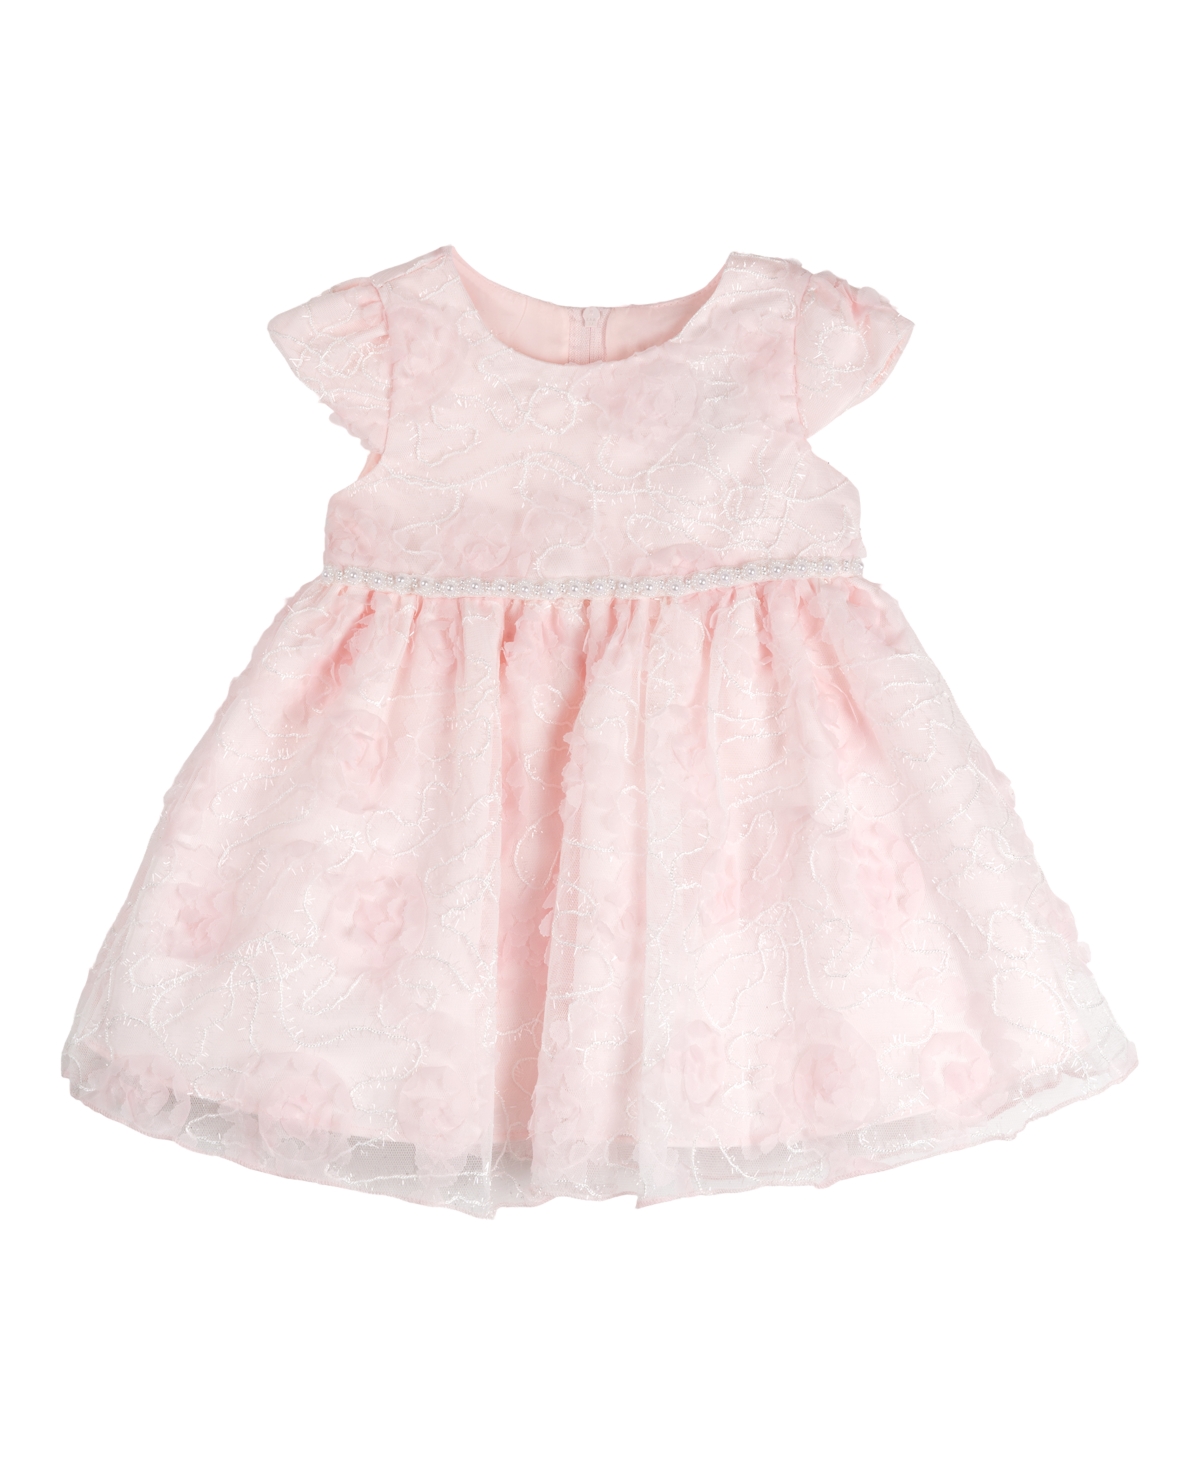 Rare Editions Baby Girls Embroidered Floral Soutache Social Dress In Blush